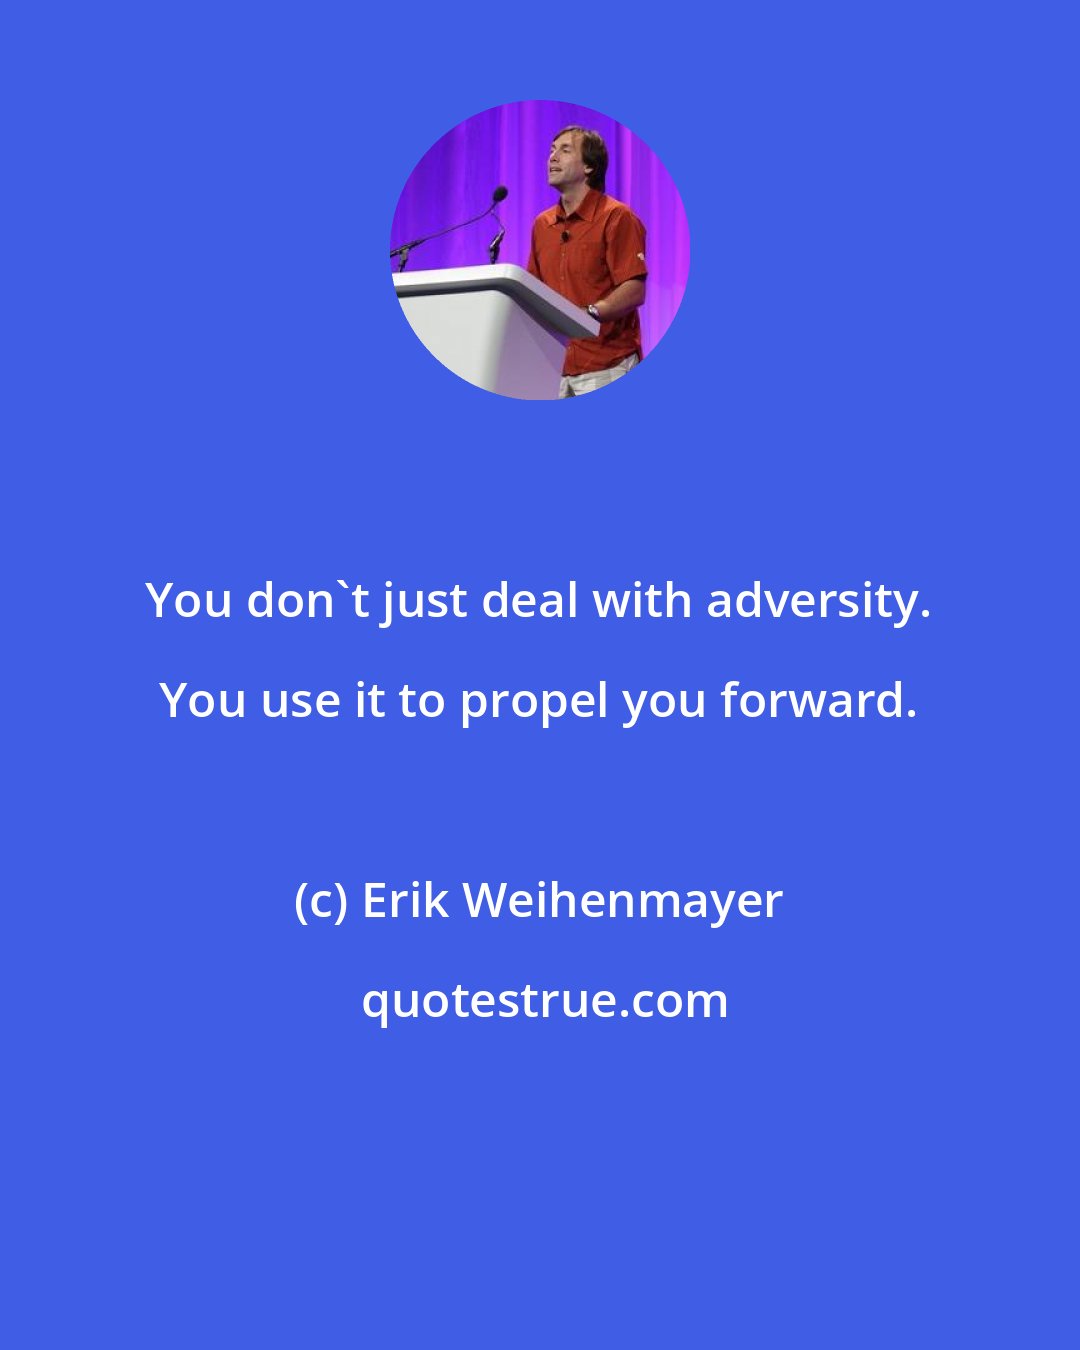 Erik Weihenmayer: You don't just deal with adversity. You use it to propel you forward.